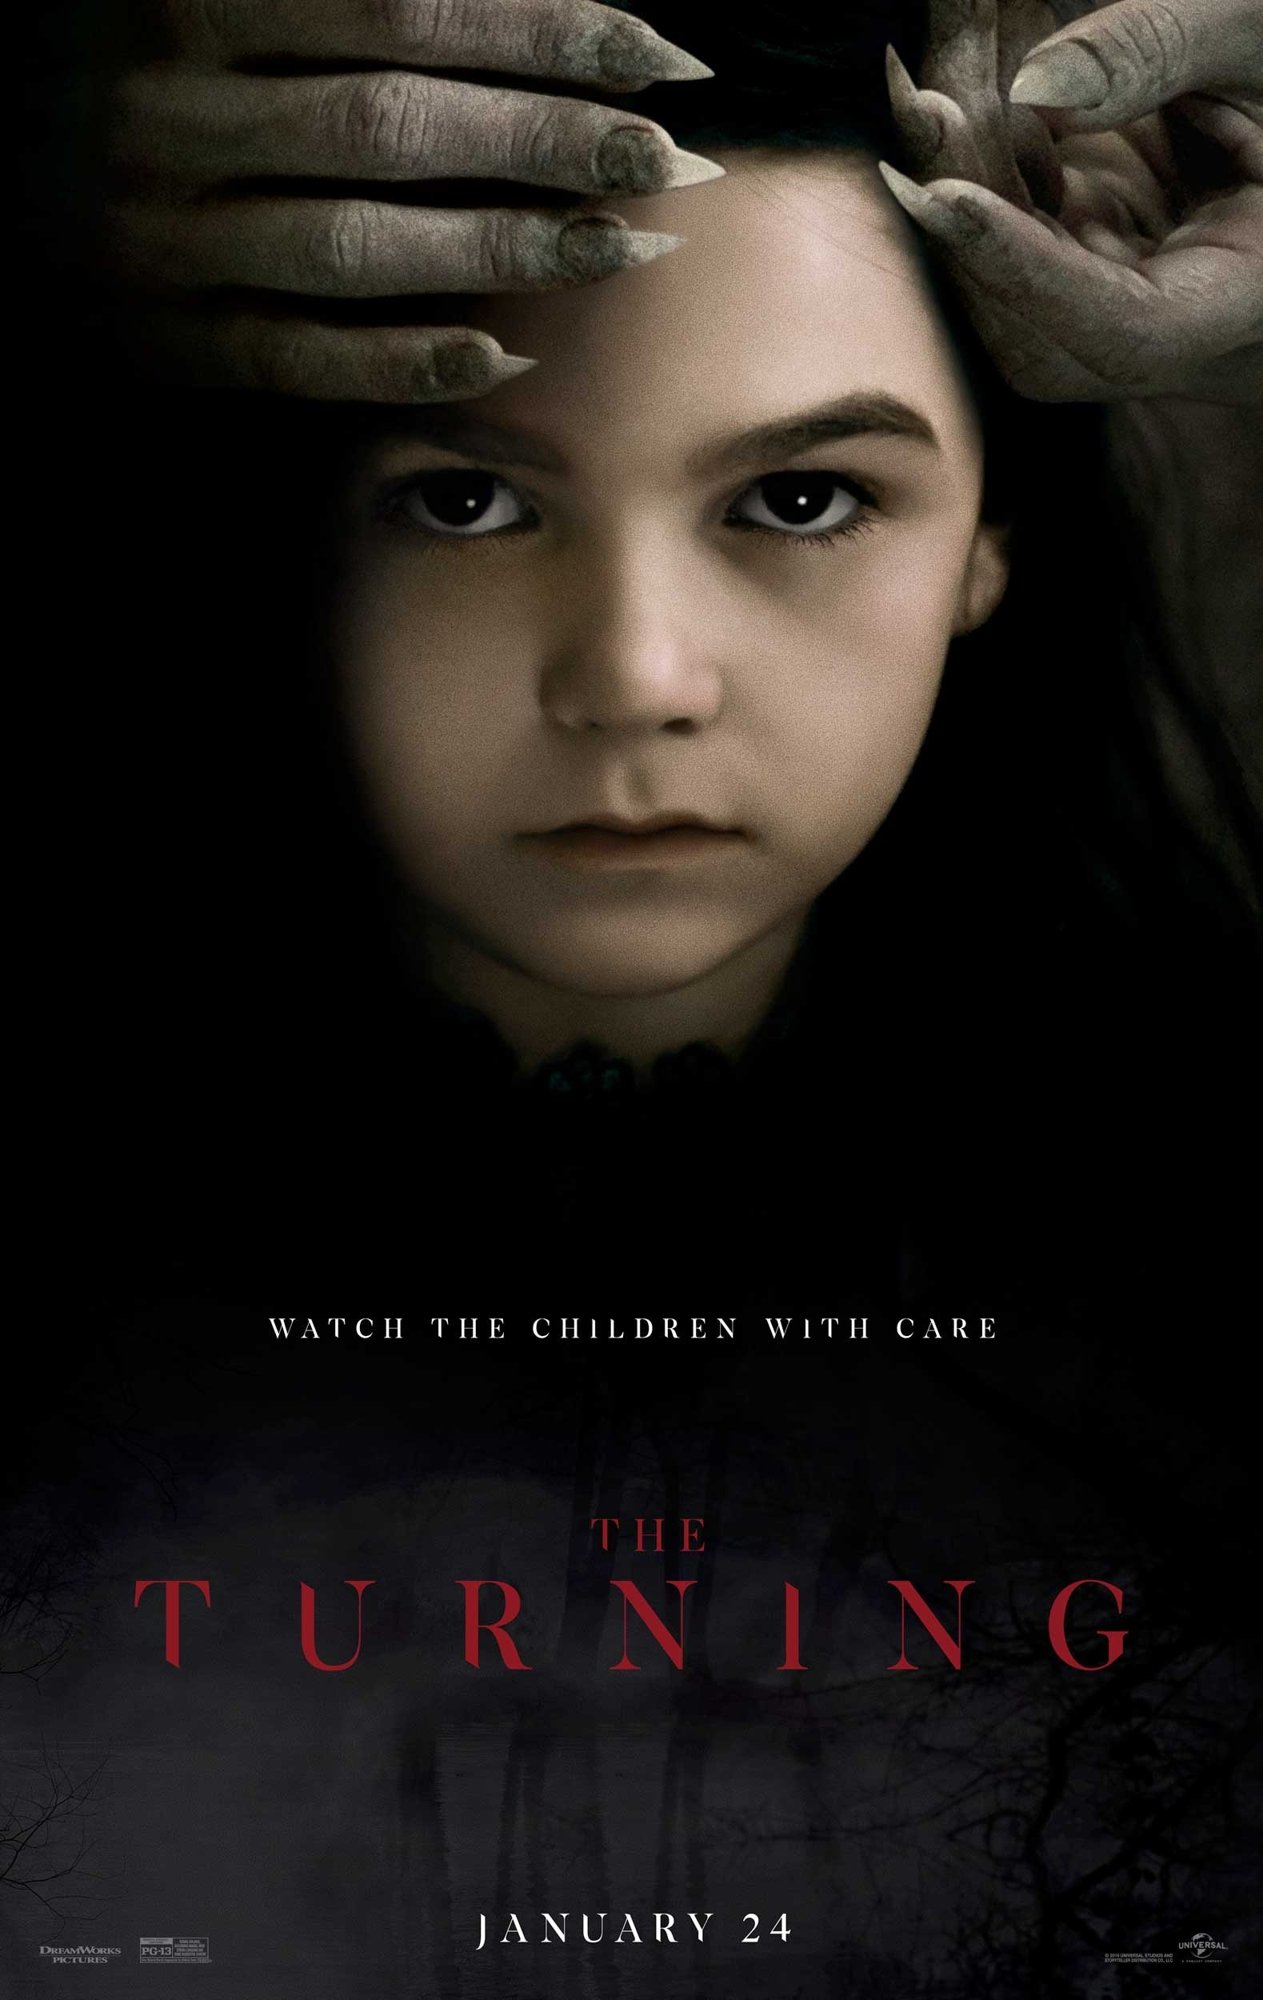 The Turning (2020) Pictures, Trailer, Reviews, News, DVD and Soundtrack